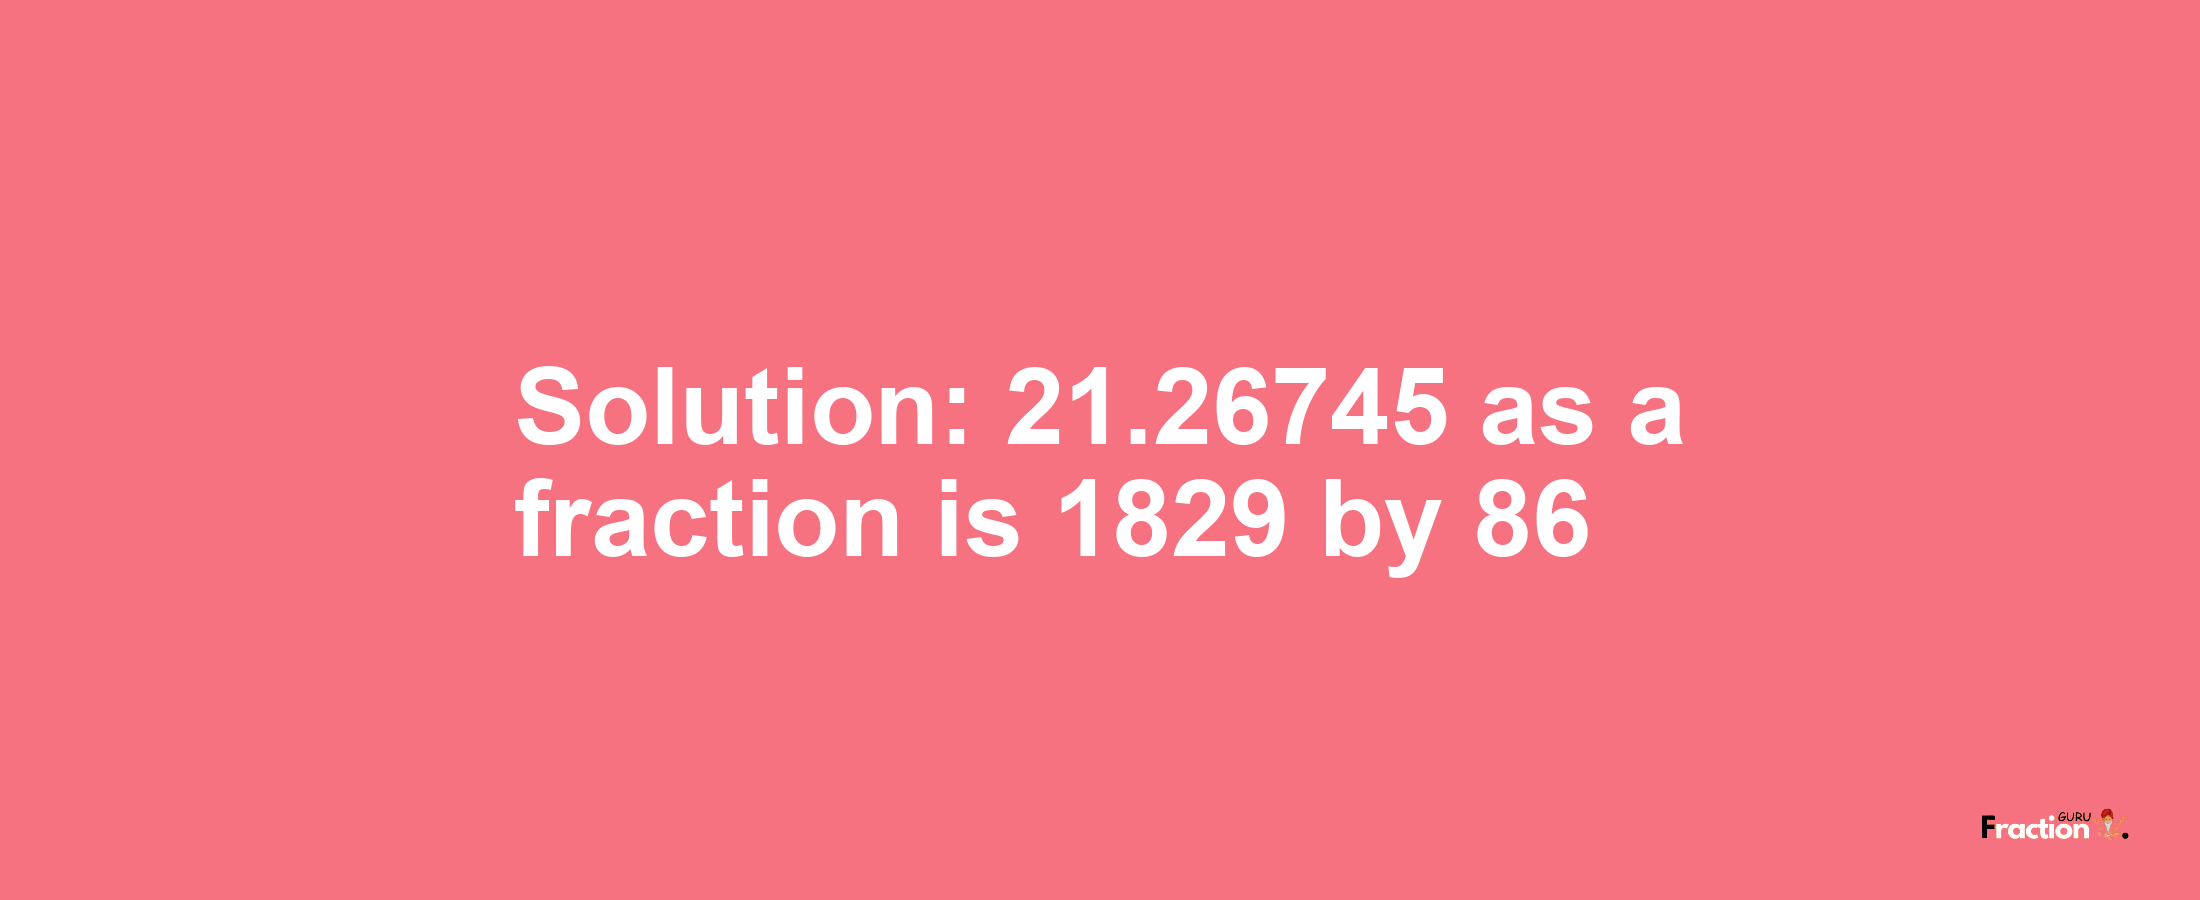 Solution:21.26745 as a fraction is 1829/86